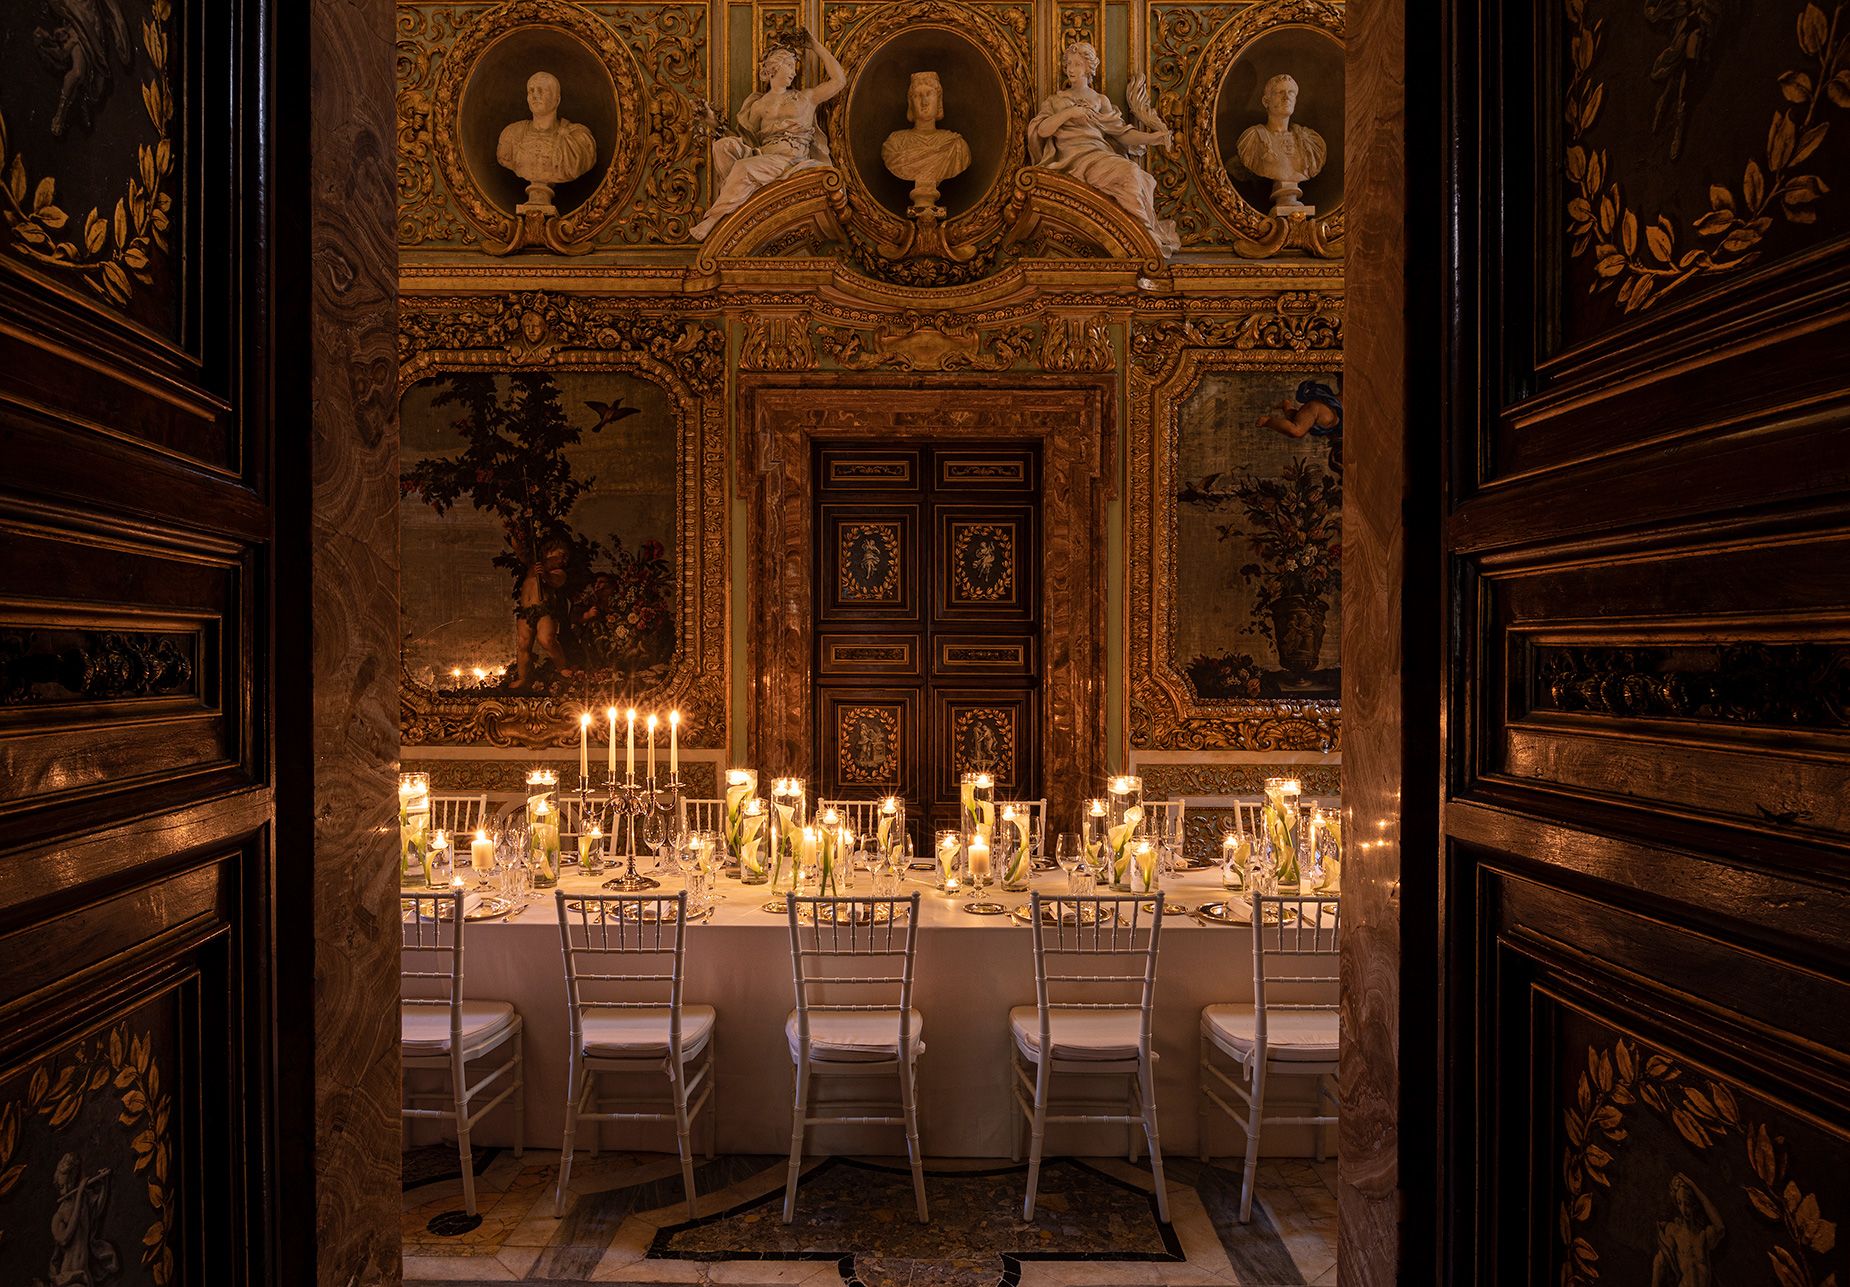 Candle-lit dinners are served in the stunning Mirrors Hall.